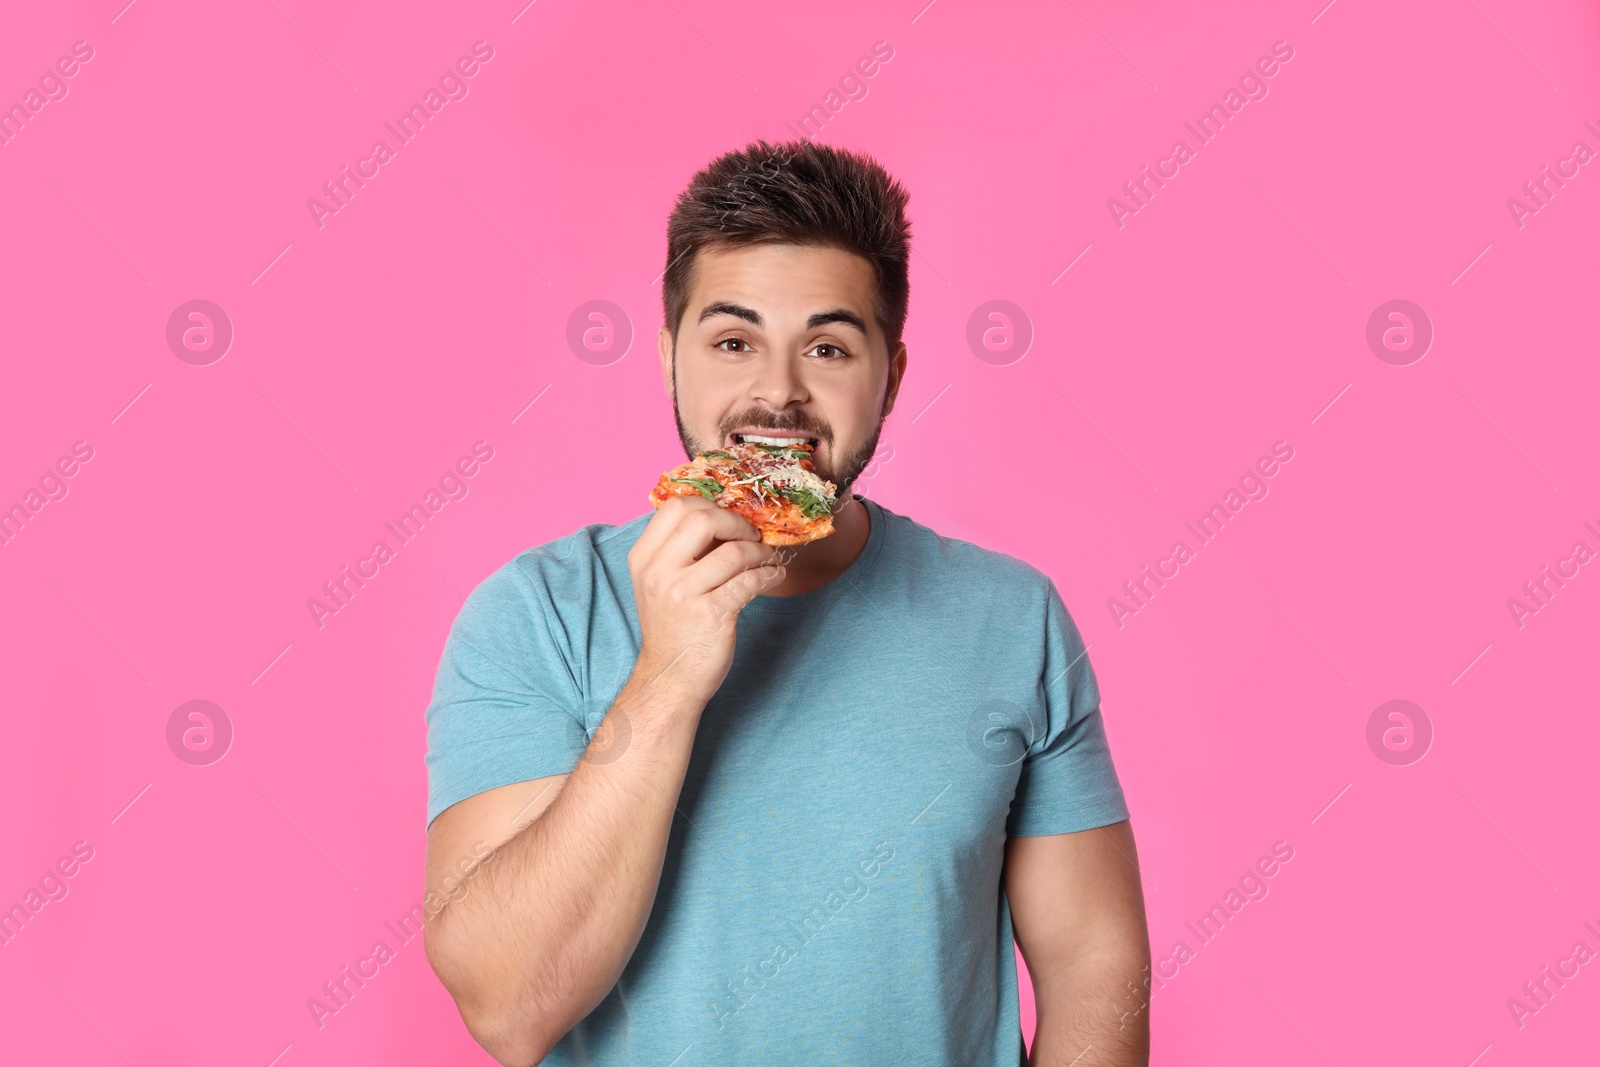 Photo of Handsome man eating pizza on pink background